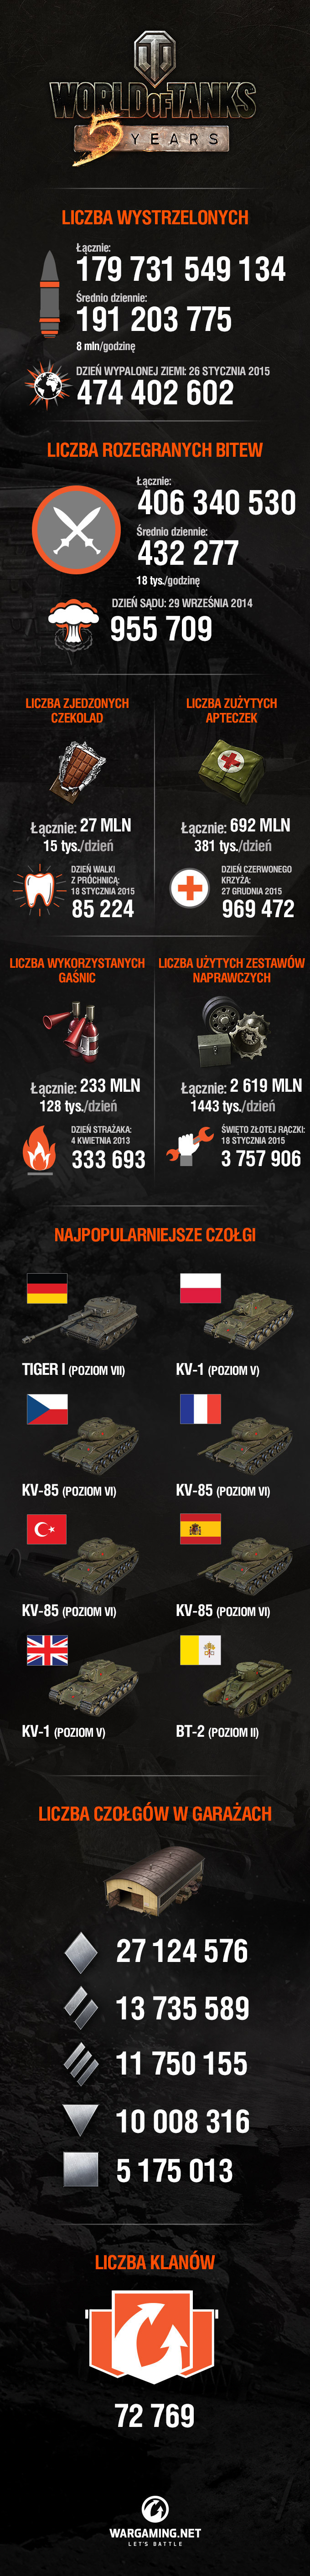 wot_infographic_5thanniversary_phil_pl_v2